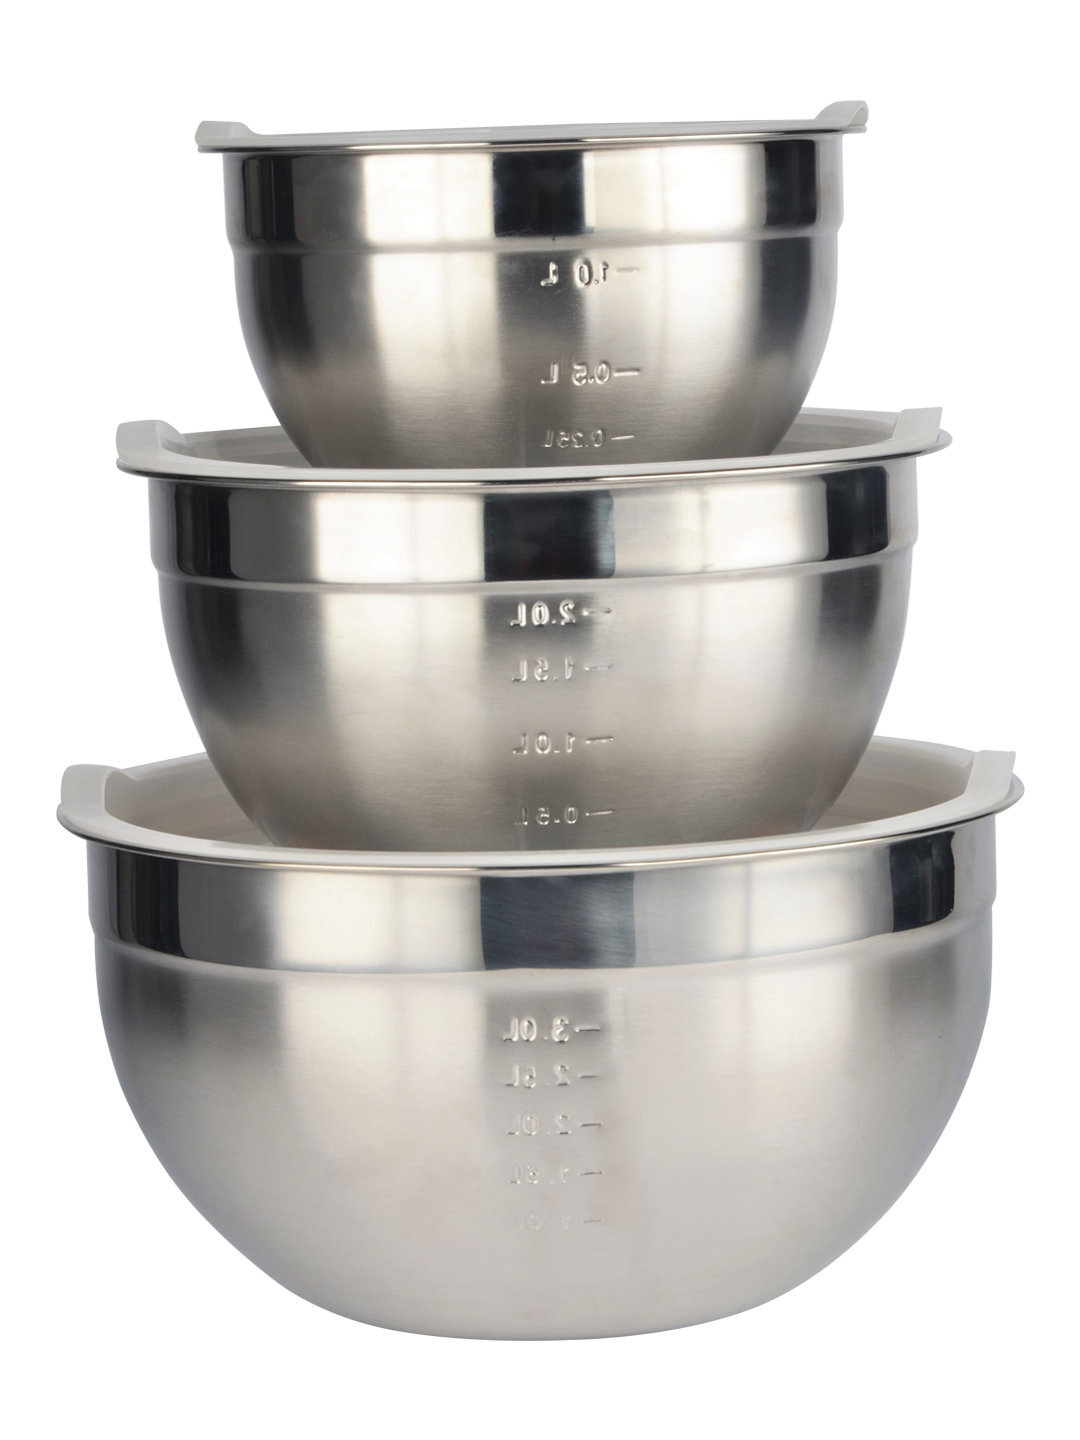 Choice Stainless Steel Standard Mixing Bowl Set with Silicone Bottom - 9/Set